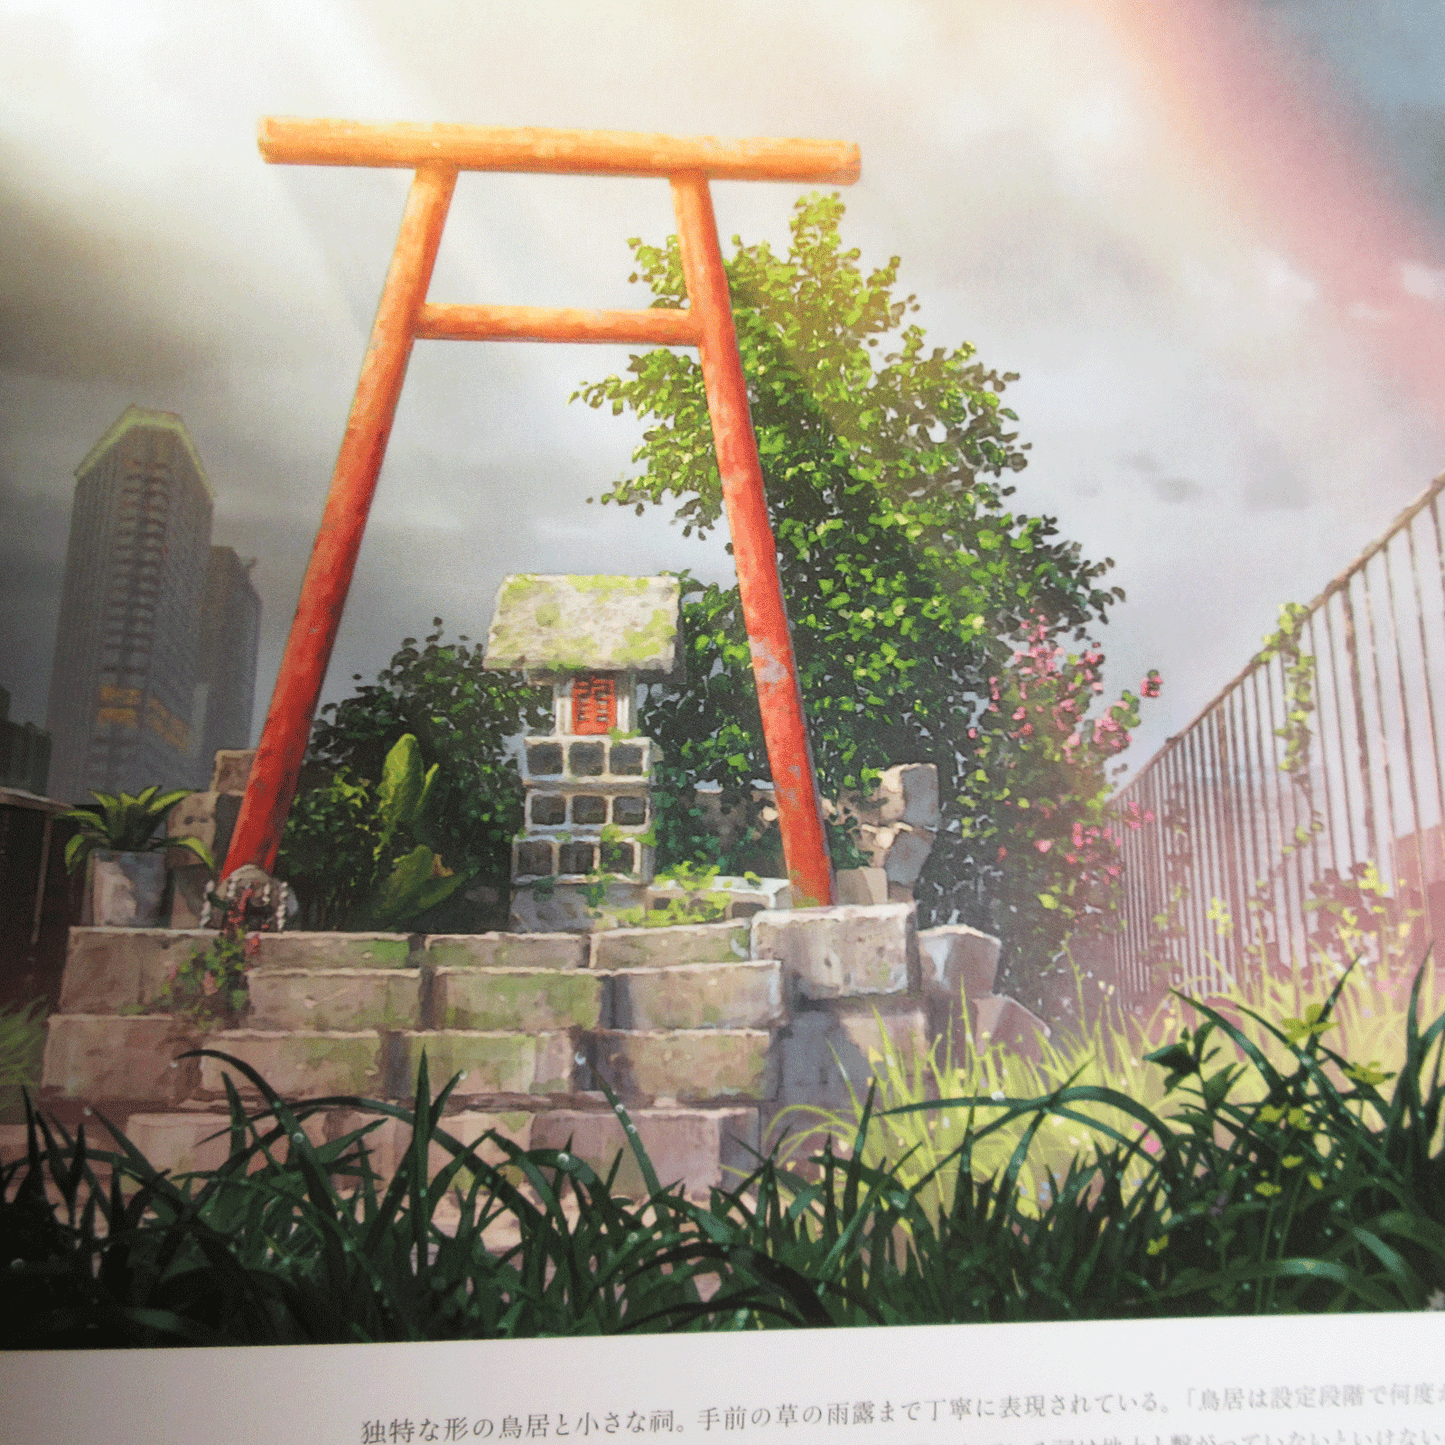 Tenki no Ko (Weathering with You) Background Art Book